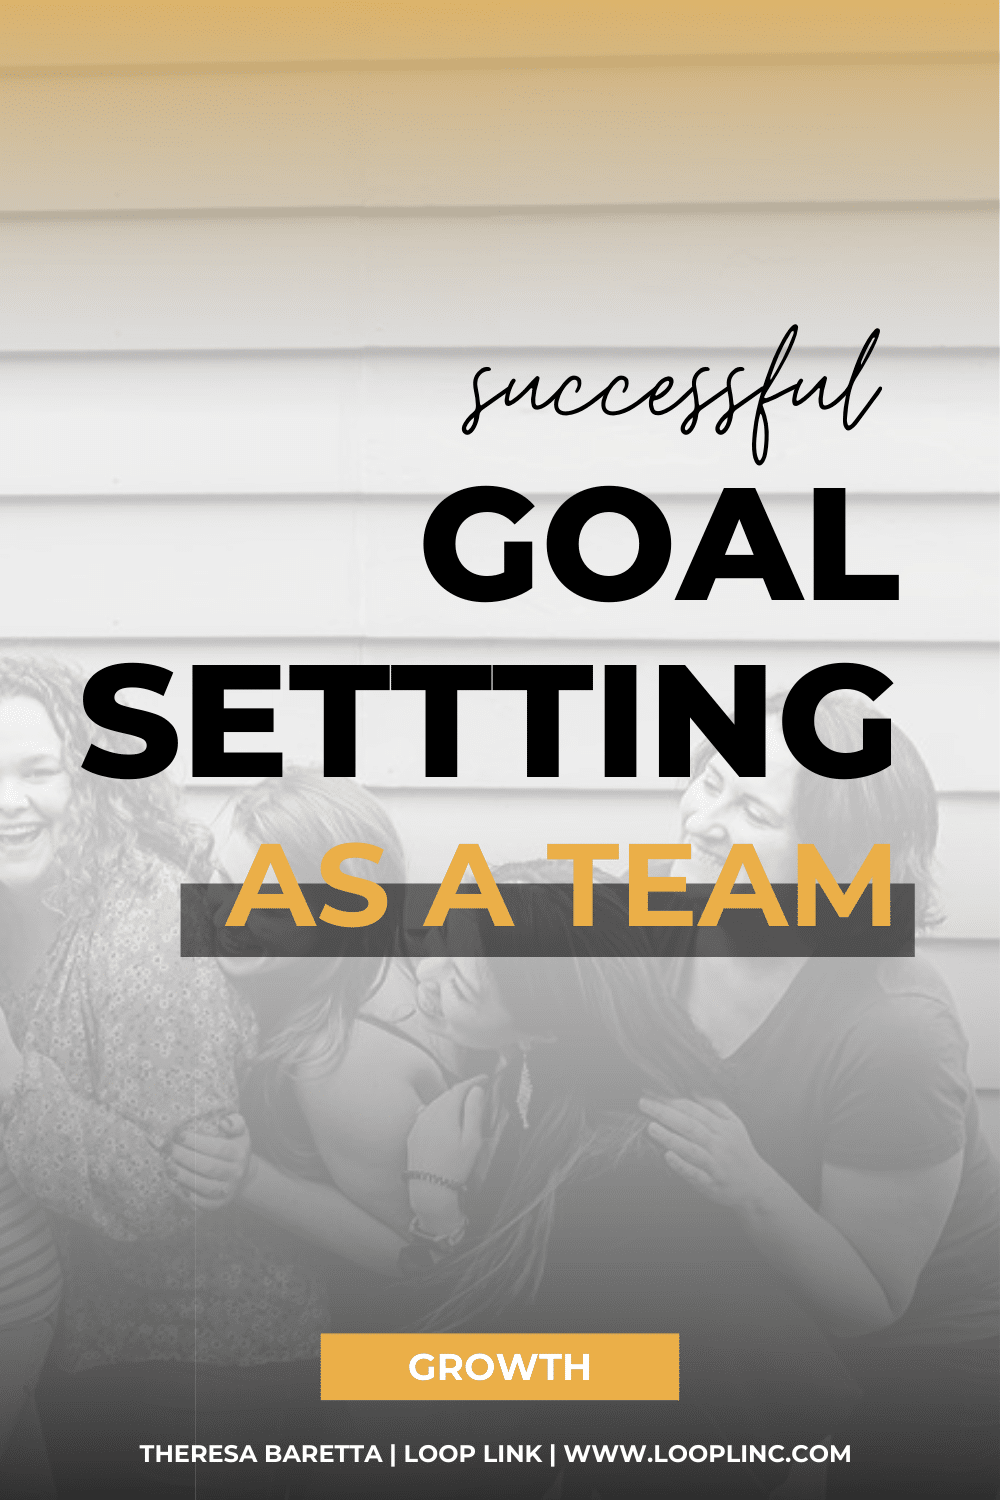 Why Goal Setting As A Team is More Successful